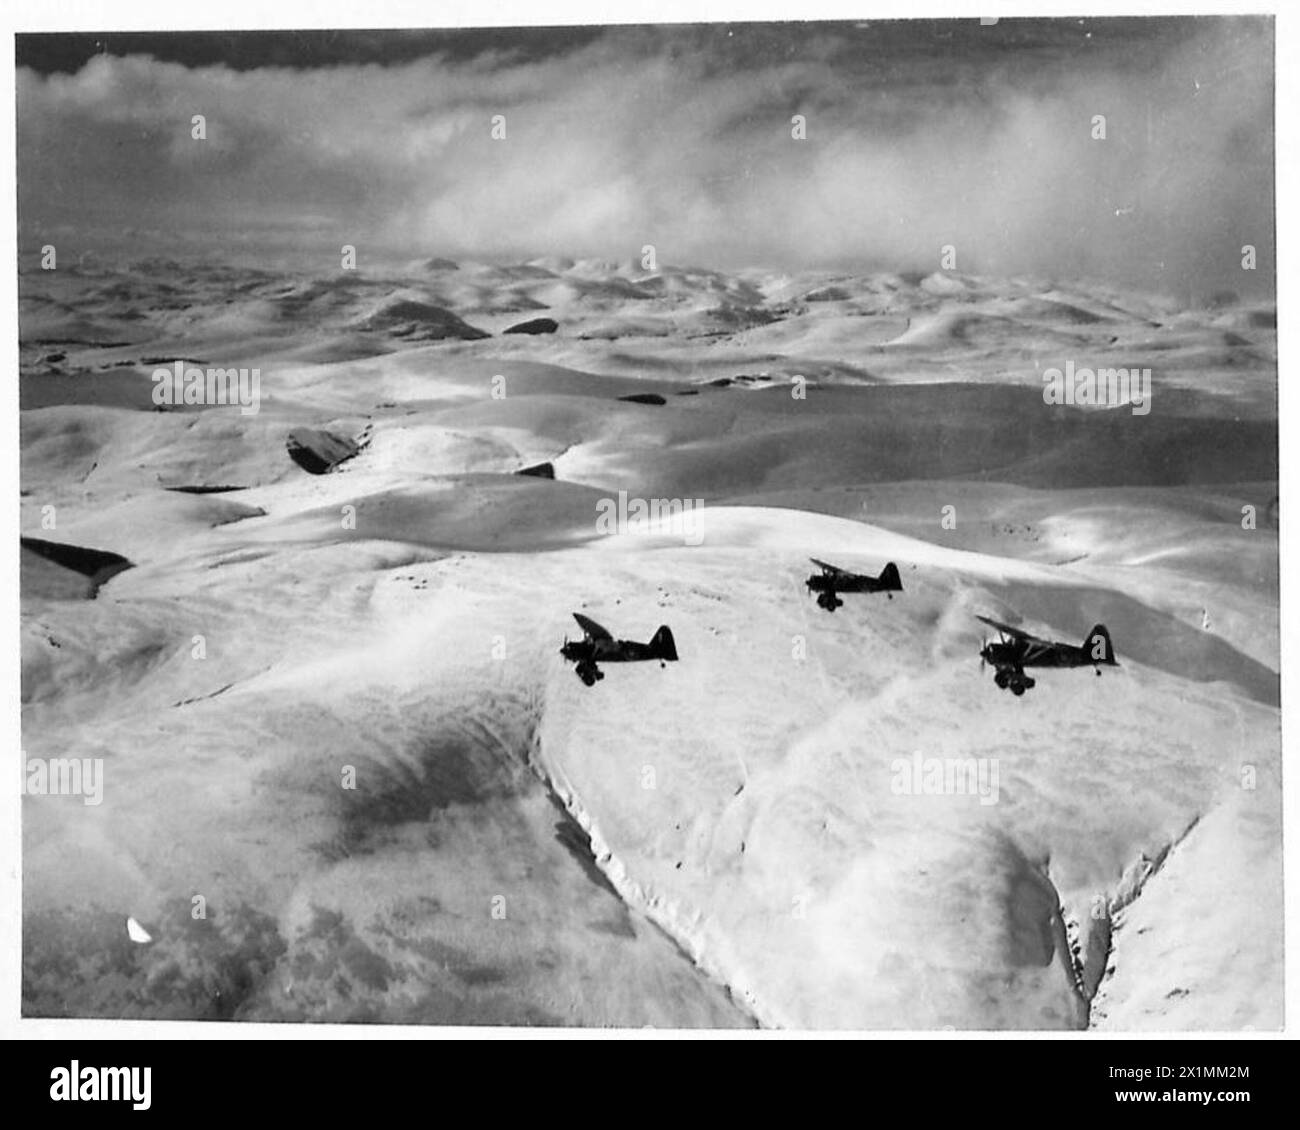 THE POLISH AIR FORCE IN BRITAIN, 1940-1947 - Three Westland Lysander Mark IIIAs of No. 309 Polish Fighter-Reconnaissance Squadron (part of the RAF Army Cooperation Command), based at Dunino, Fife, on a photo reconnaissance training sortie over snow-covered Scottish hills, Polish Air Force, Polish Air Force, 309 "Land of Czerwień" Fighter-Reconnaissance Squadron, Royal Air Force, Station, Calveley Stock Photo